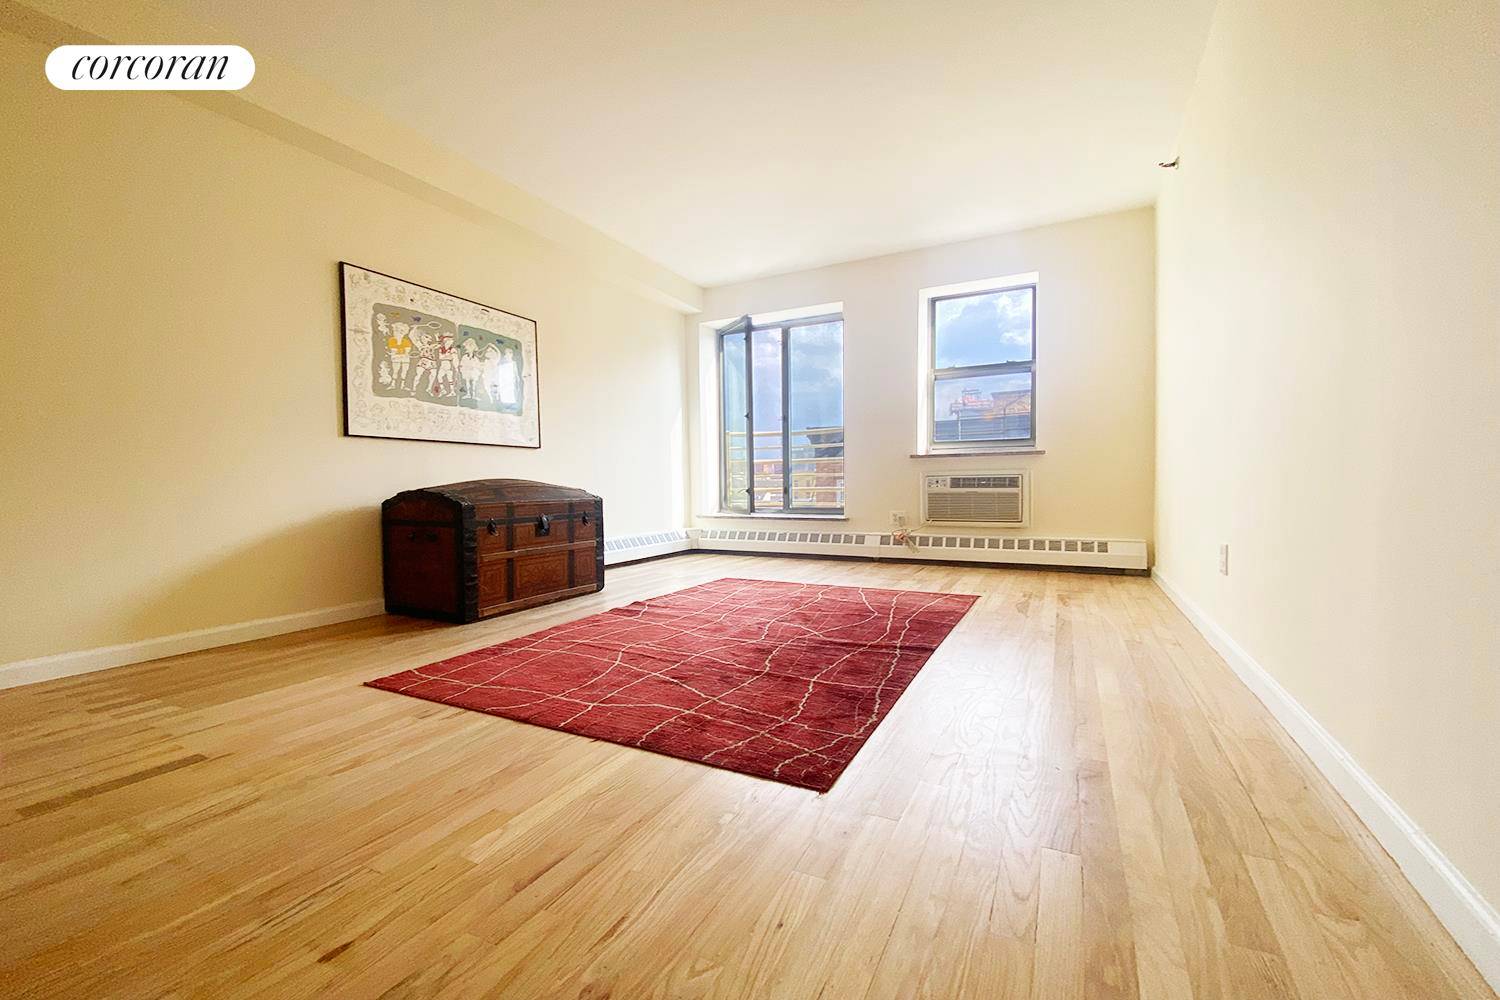 This spacious two bedroom, two bathroom Coop home features a Southern exposure overlooking 119th Street.